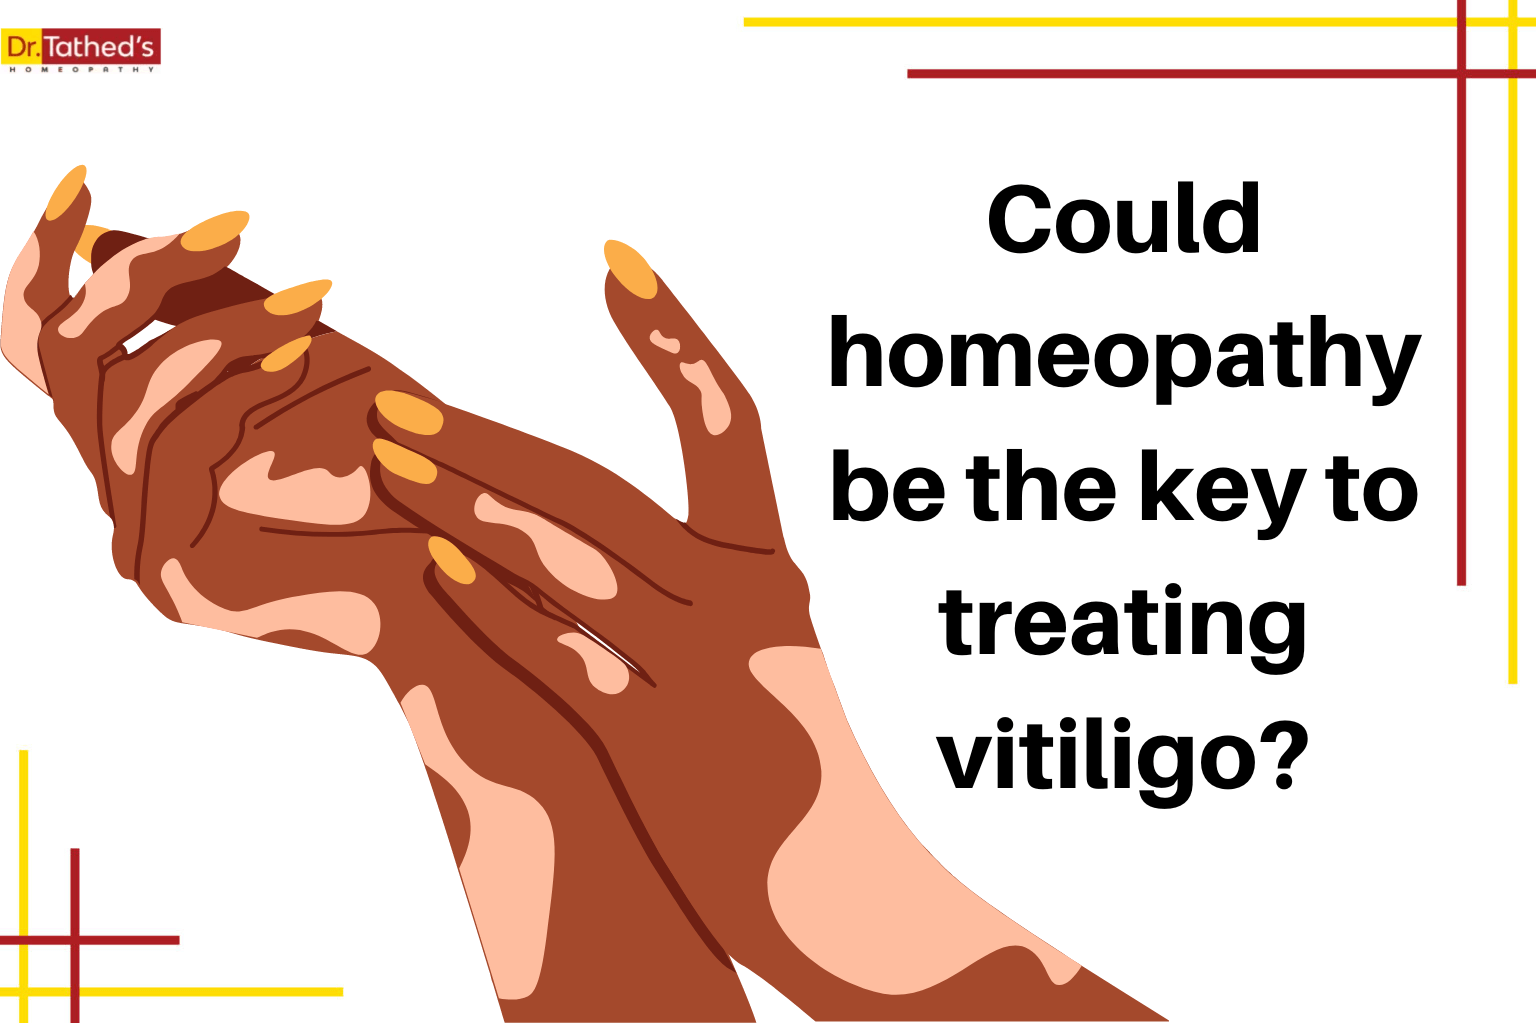 Could homeopathy be the key to treating vitiligo?